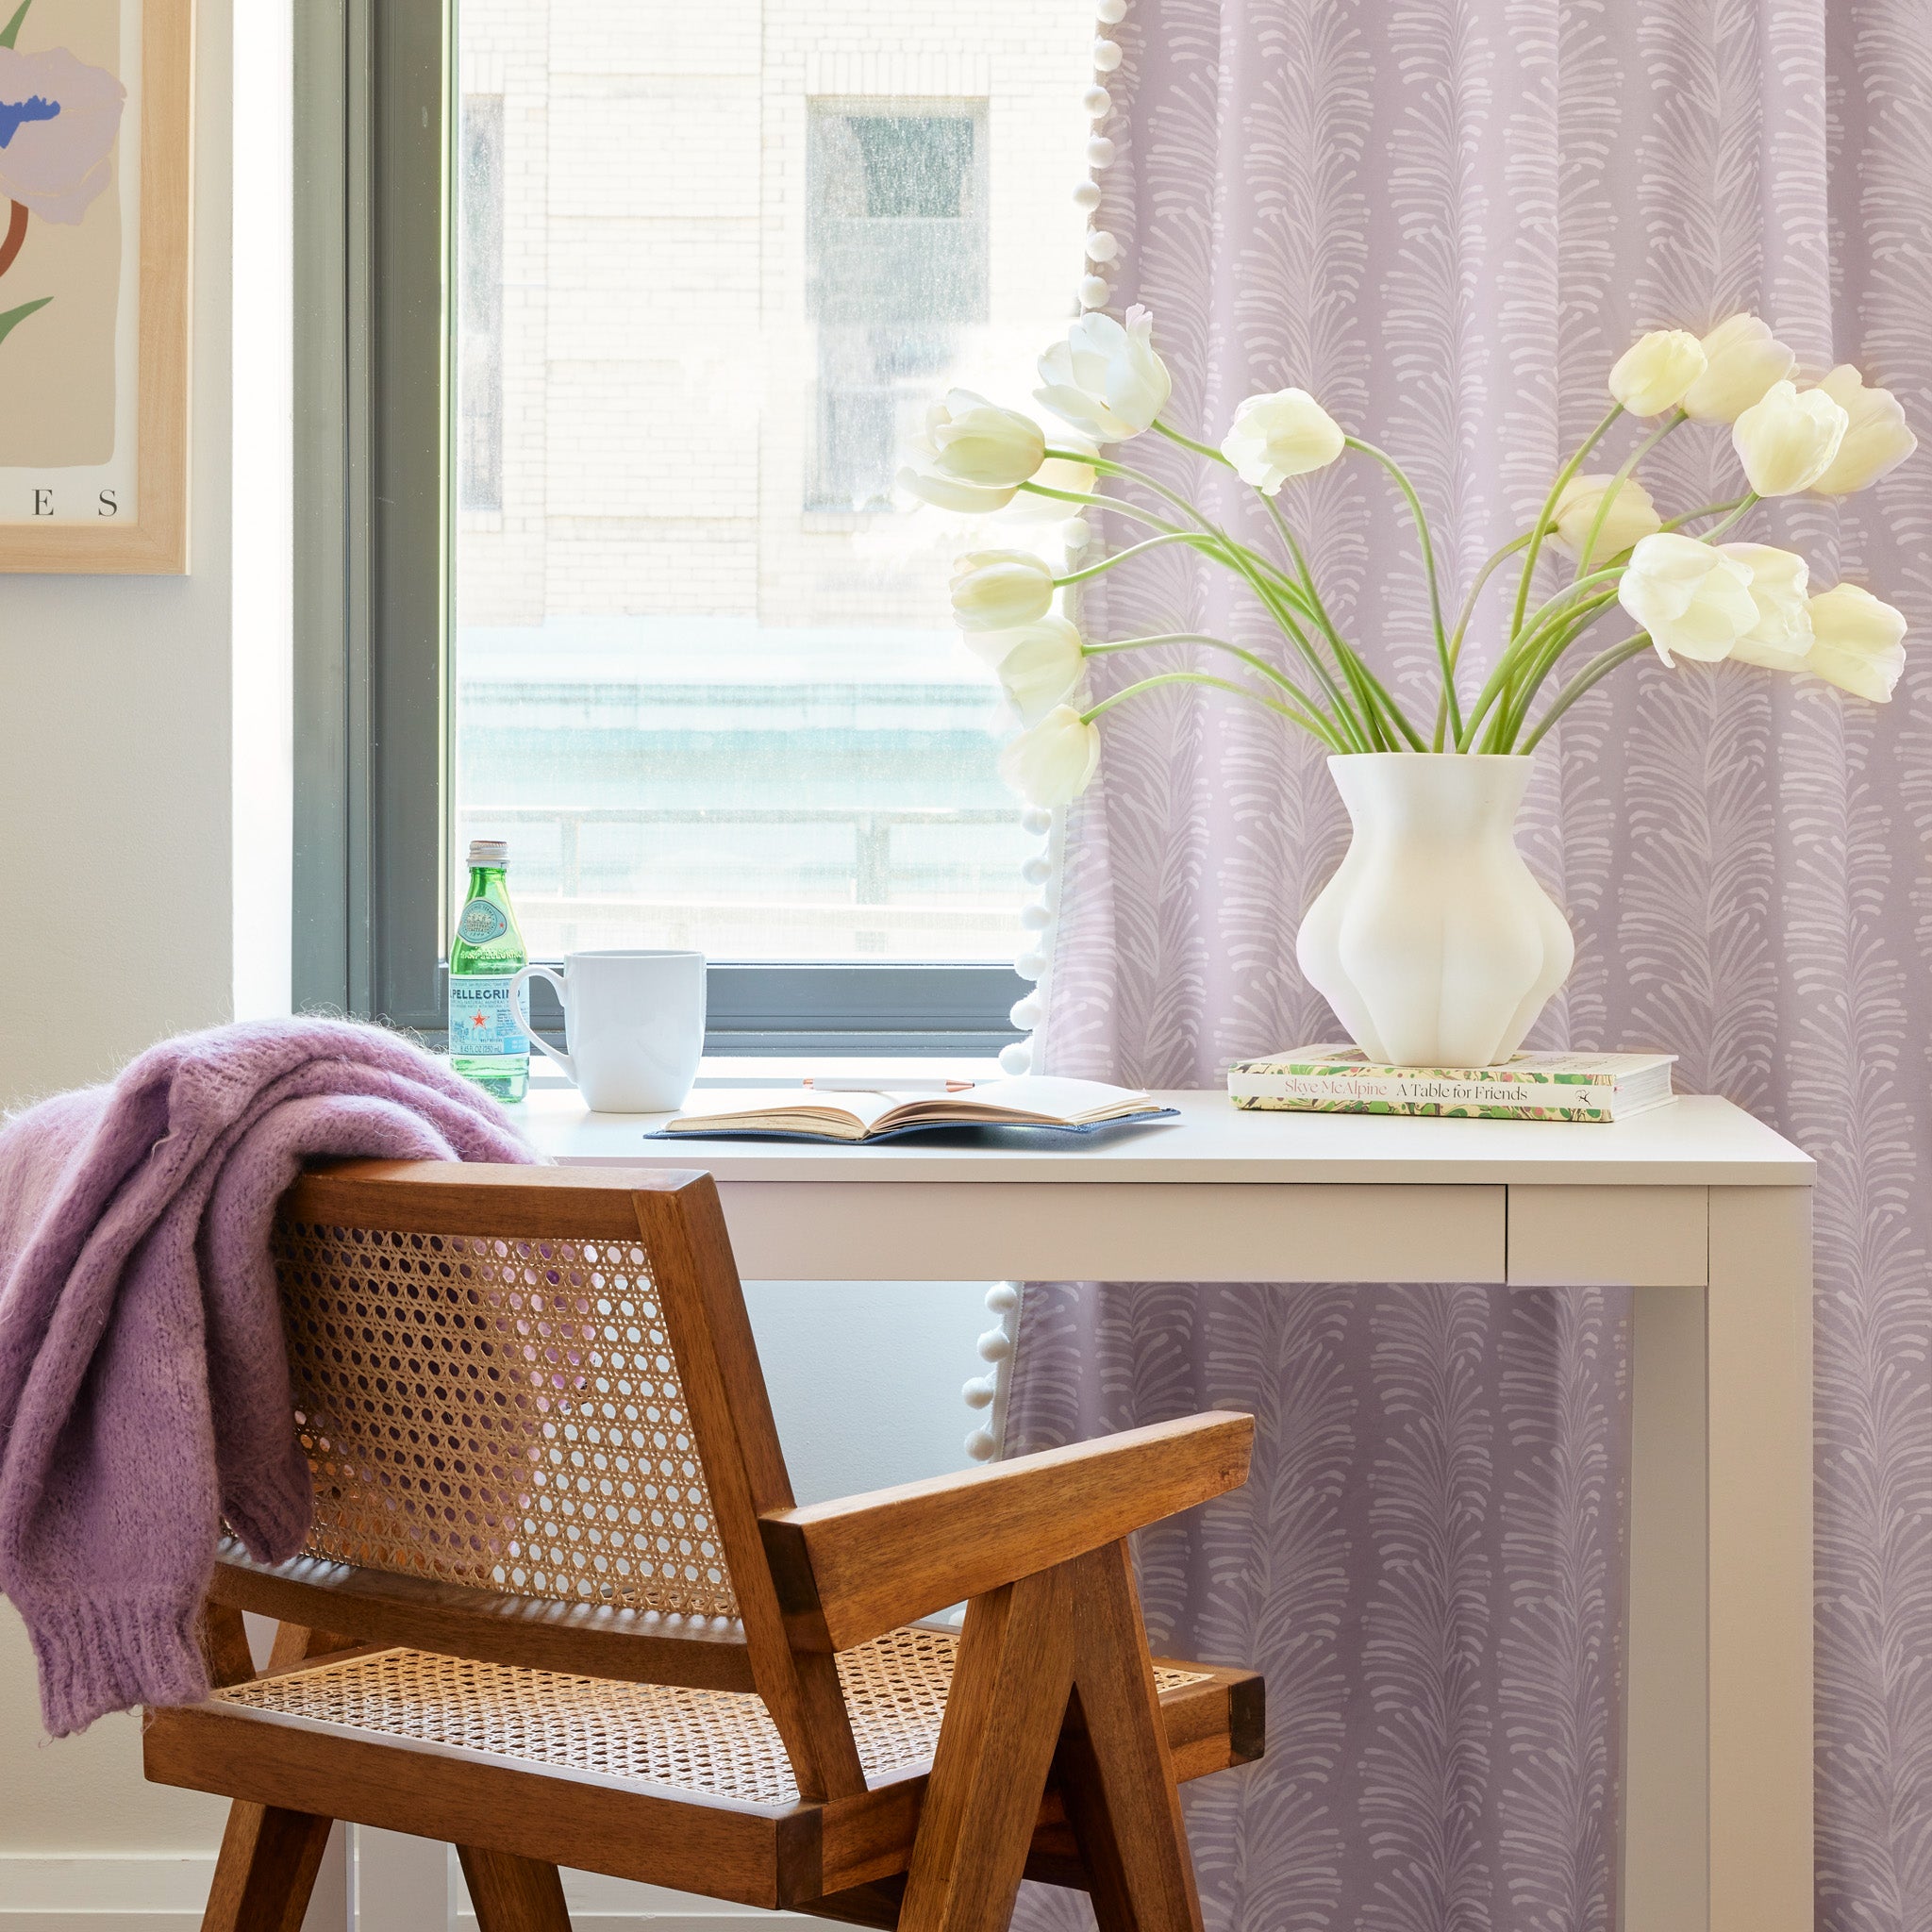 Study Corner styled with wooden chair in front of white table with one open book and one closed book under white vase full of white flowers by Lavender Botanical Stripe Printed Curtain by illuminated window